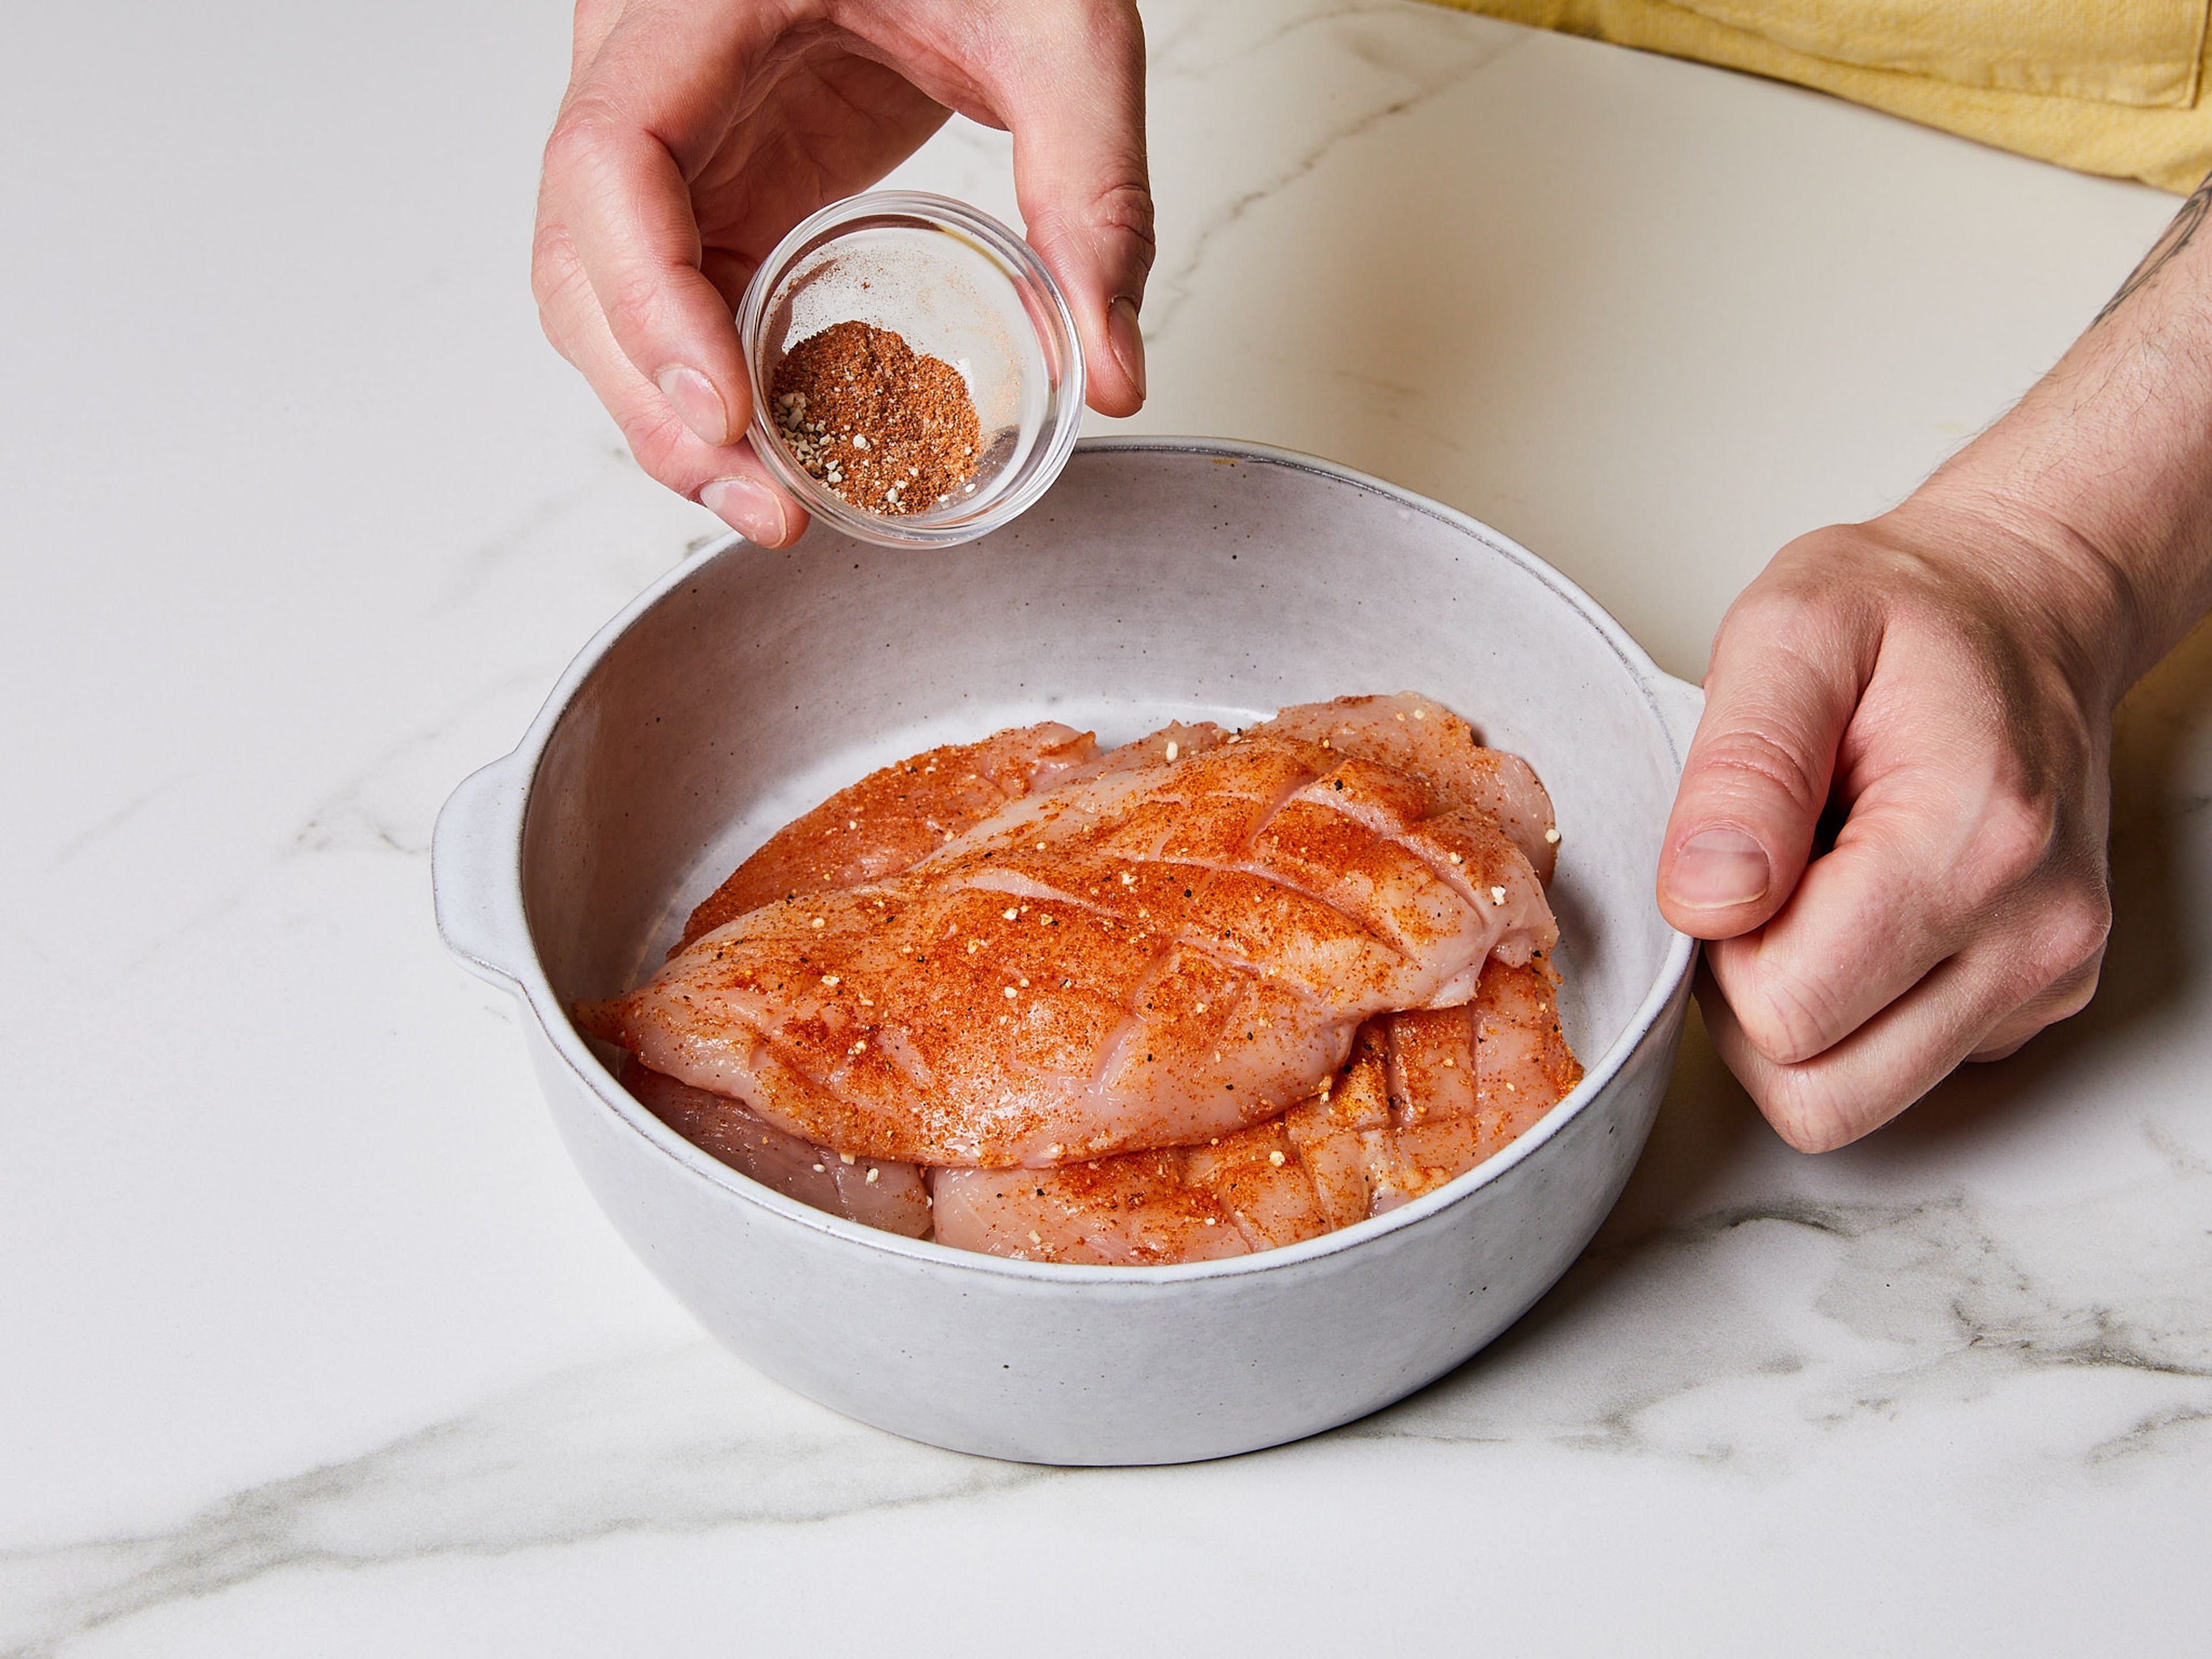 Cut chicken breasts horizontally into two filets per breast. Score the surface of the filets in a diamond pattern for more surface area, bigger flavor and faster cooking. In a bowl, season filets with paprika powder, garlic powder, onion powder, and salt.